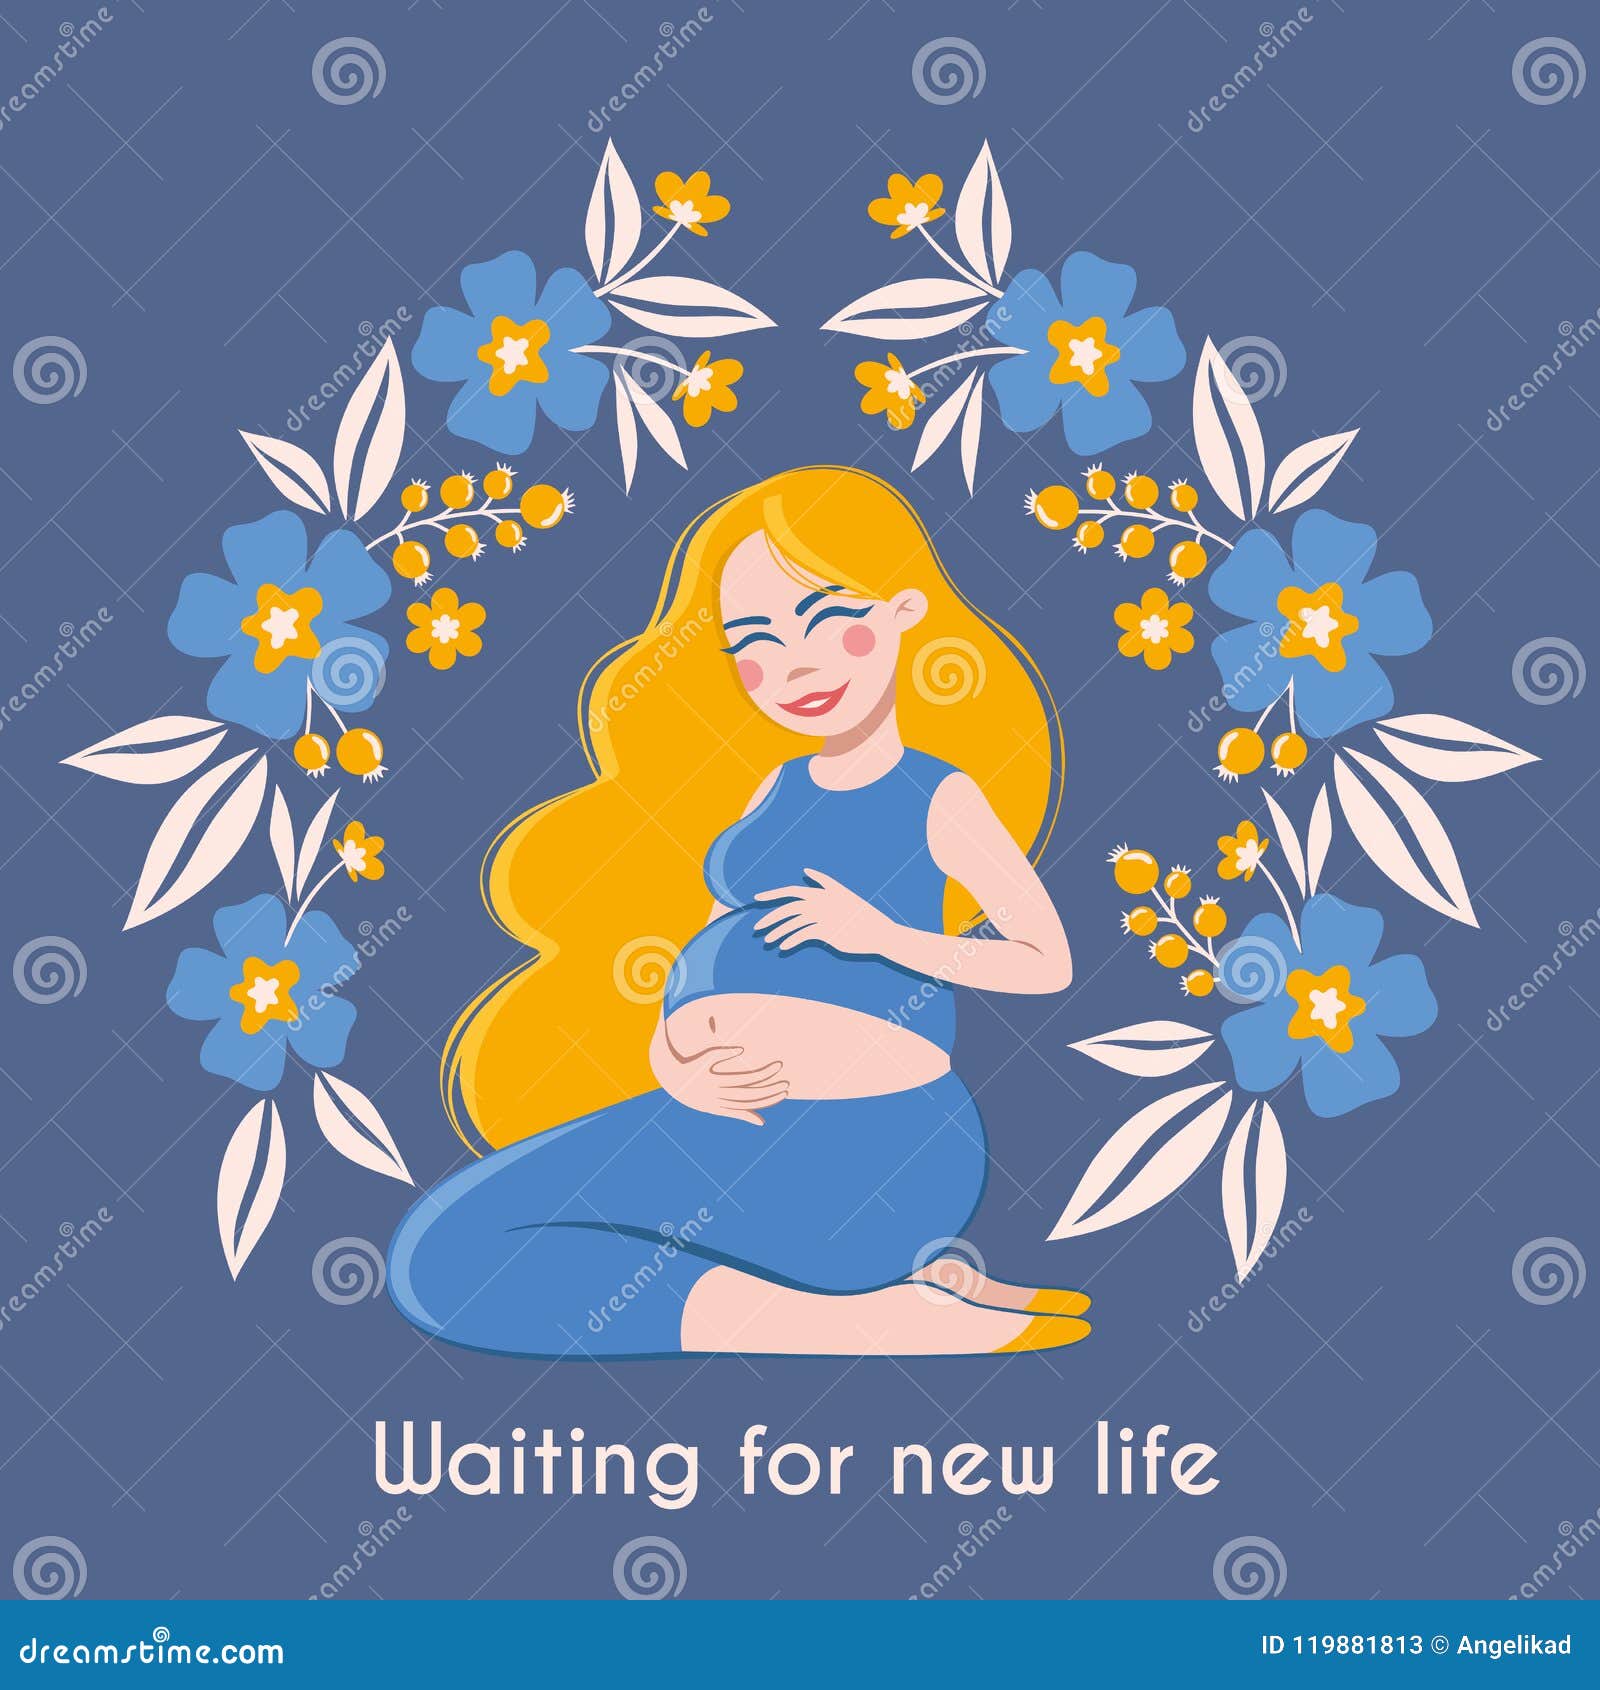 https://thumbs.dreamstime.com/z/happy-expectant-mother-greeting-card-pregnant-beautiful-woman-frame-flowers-motherhood-mothers-day-poster-illustration-119881813.jpg